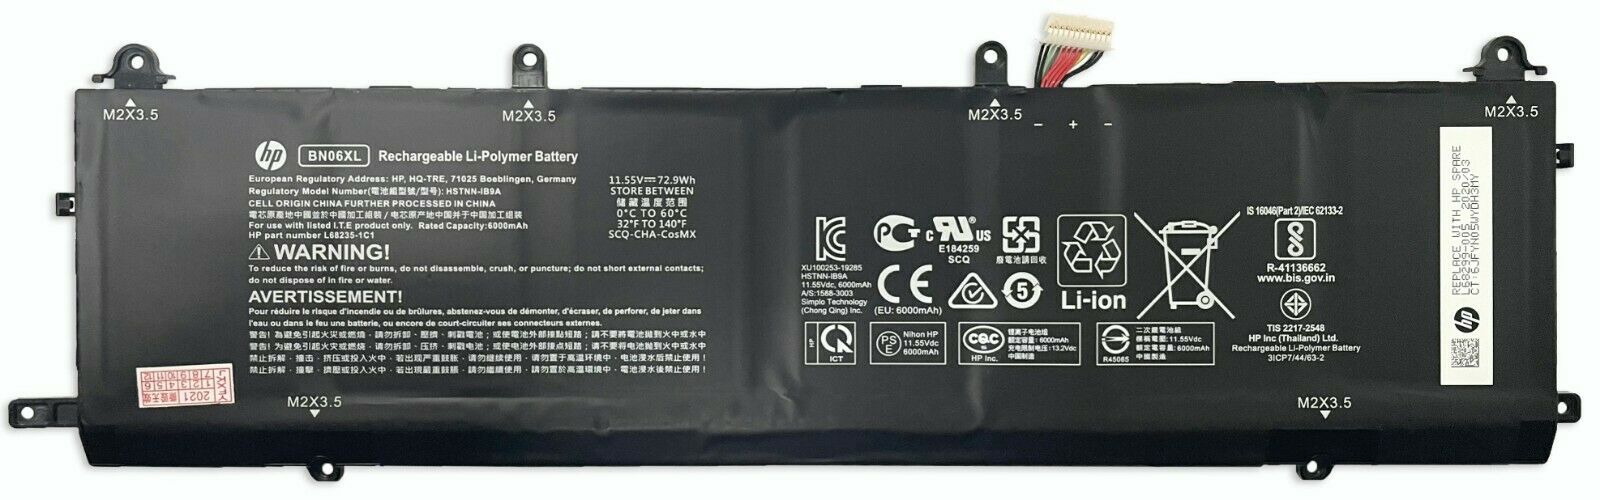 HP Spectre x360 15-eb0028nb Battery 6-cell 72.9Wh